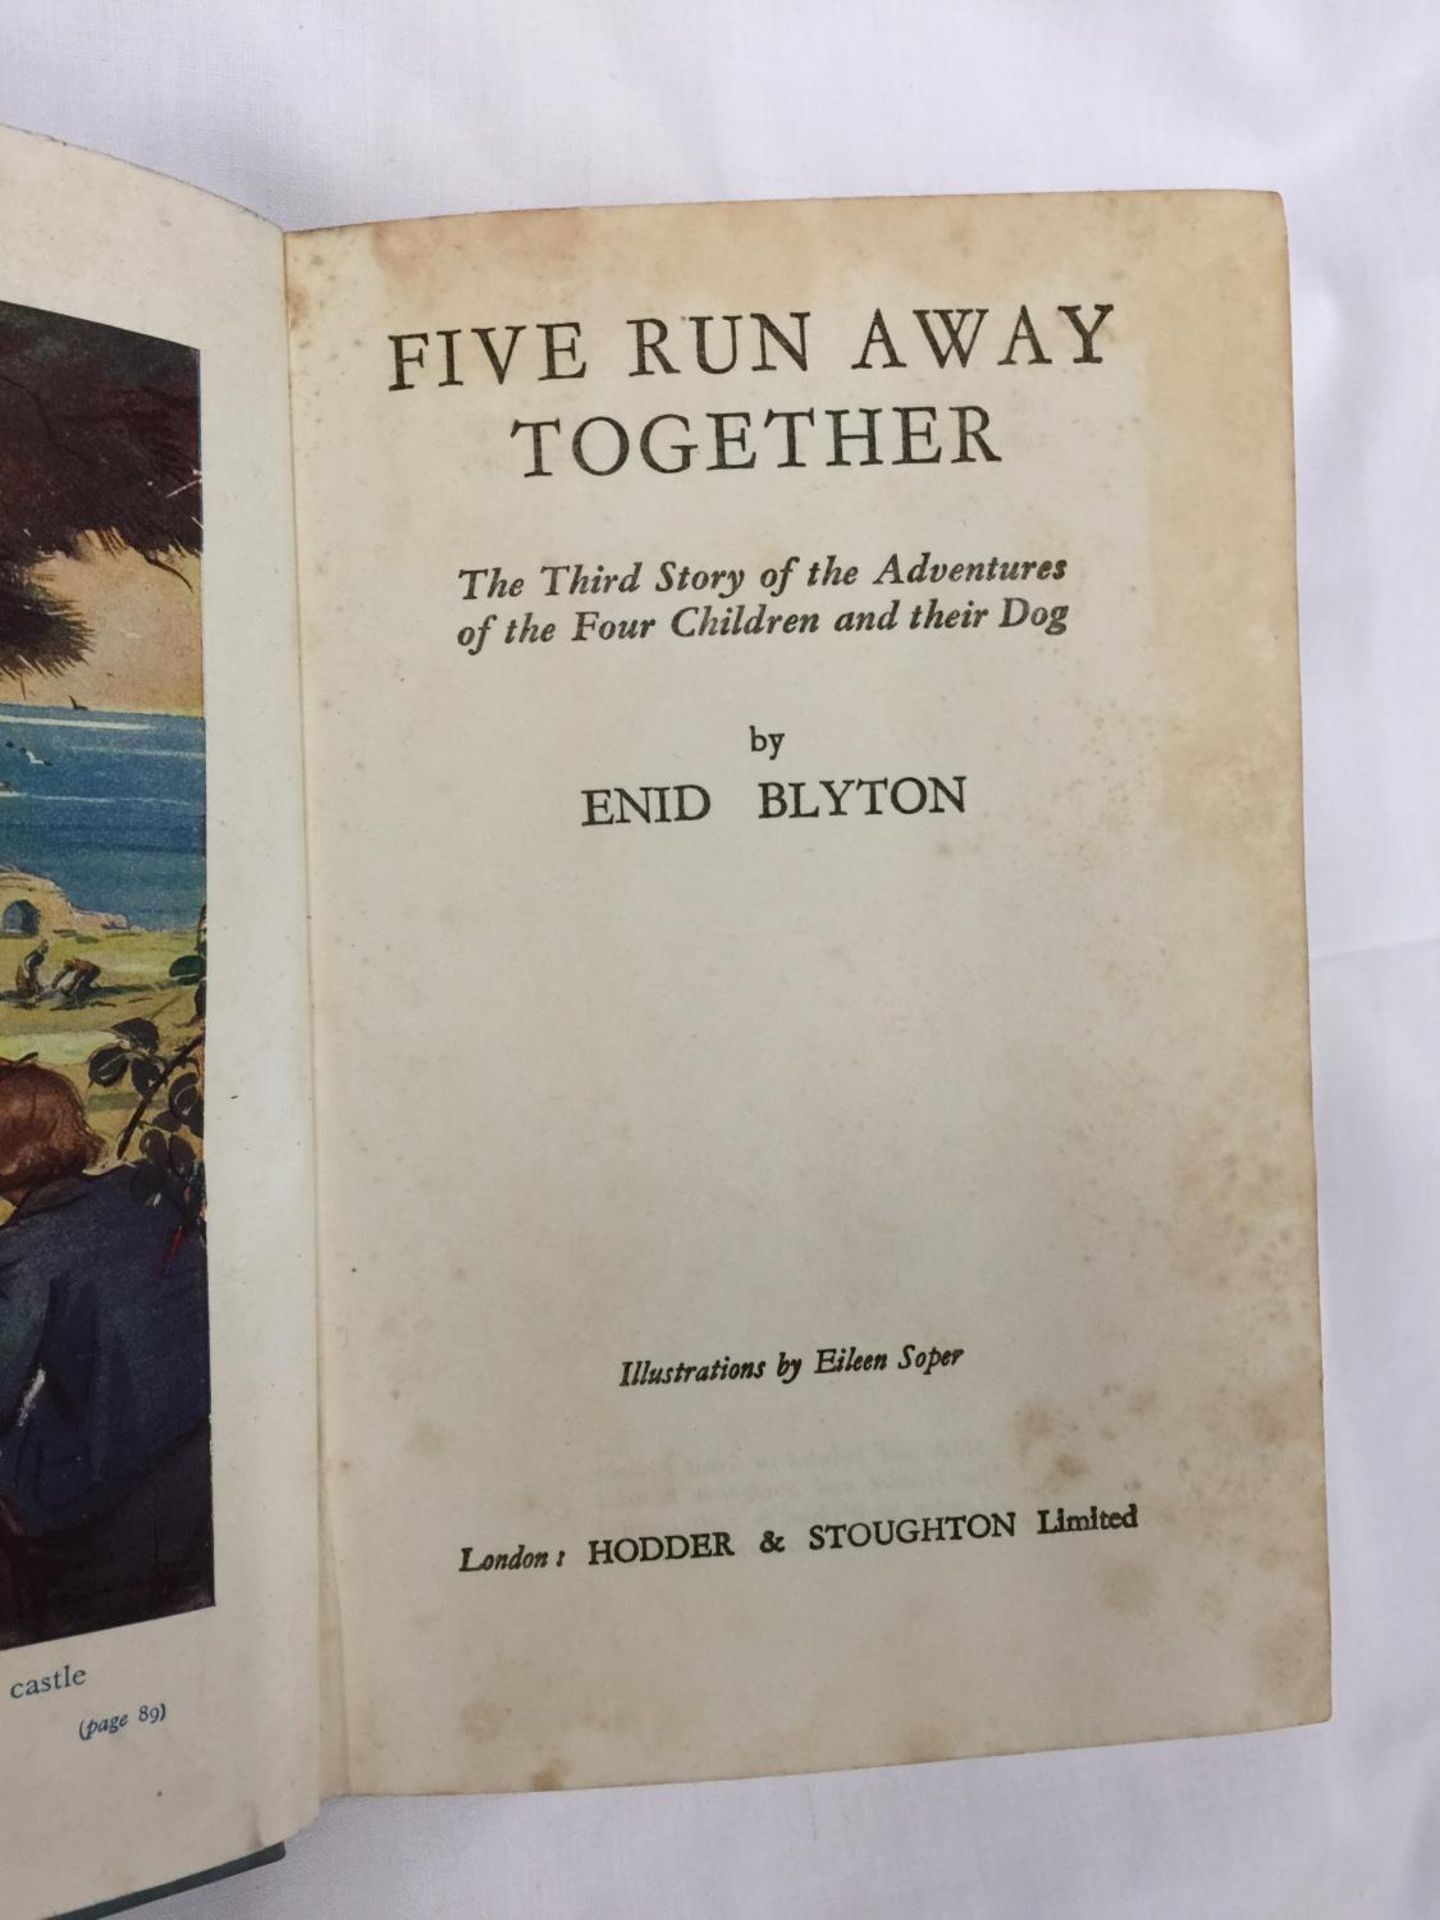 A FIRST EDITION (THIRD IMPRESSION) FIVE RUN AWAY TOGETHER HARDBACK WITH DUST JACKET BY ENID BLYTON - - Image 3 of 10